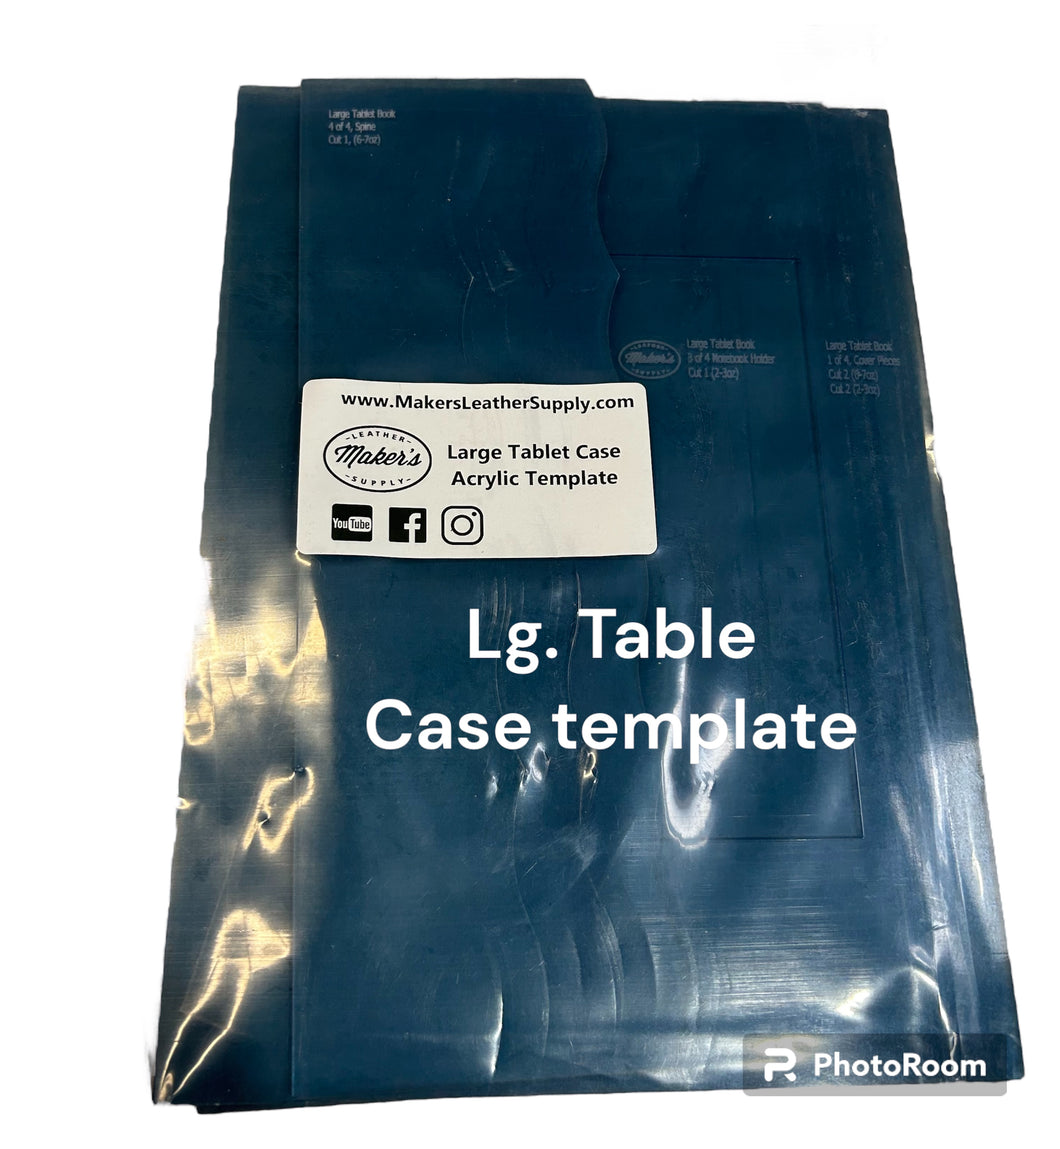 Large Tablet Case acrylic template